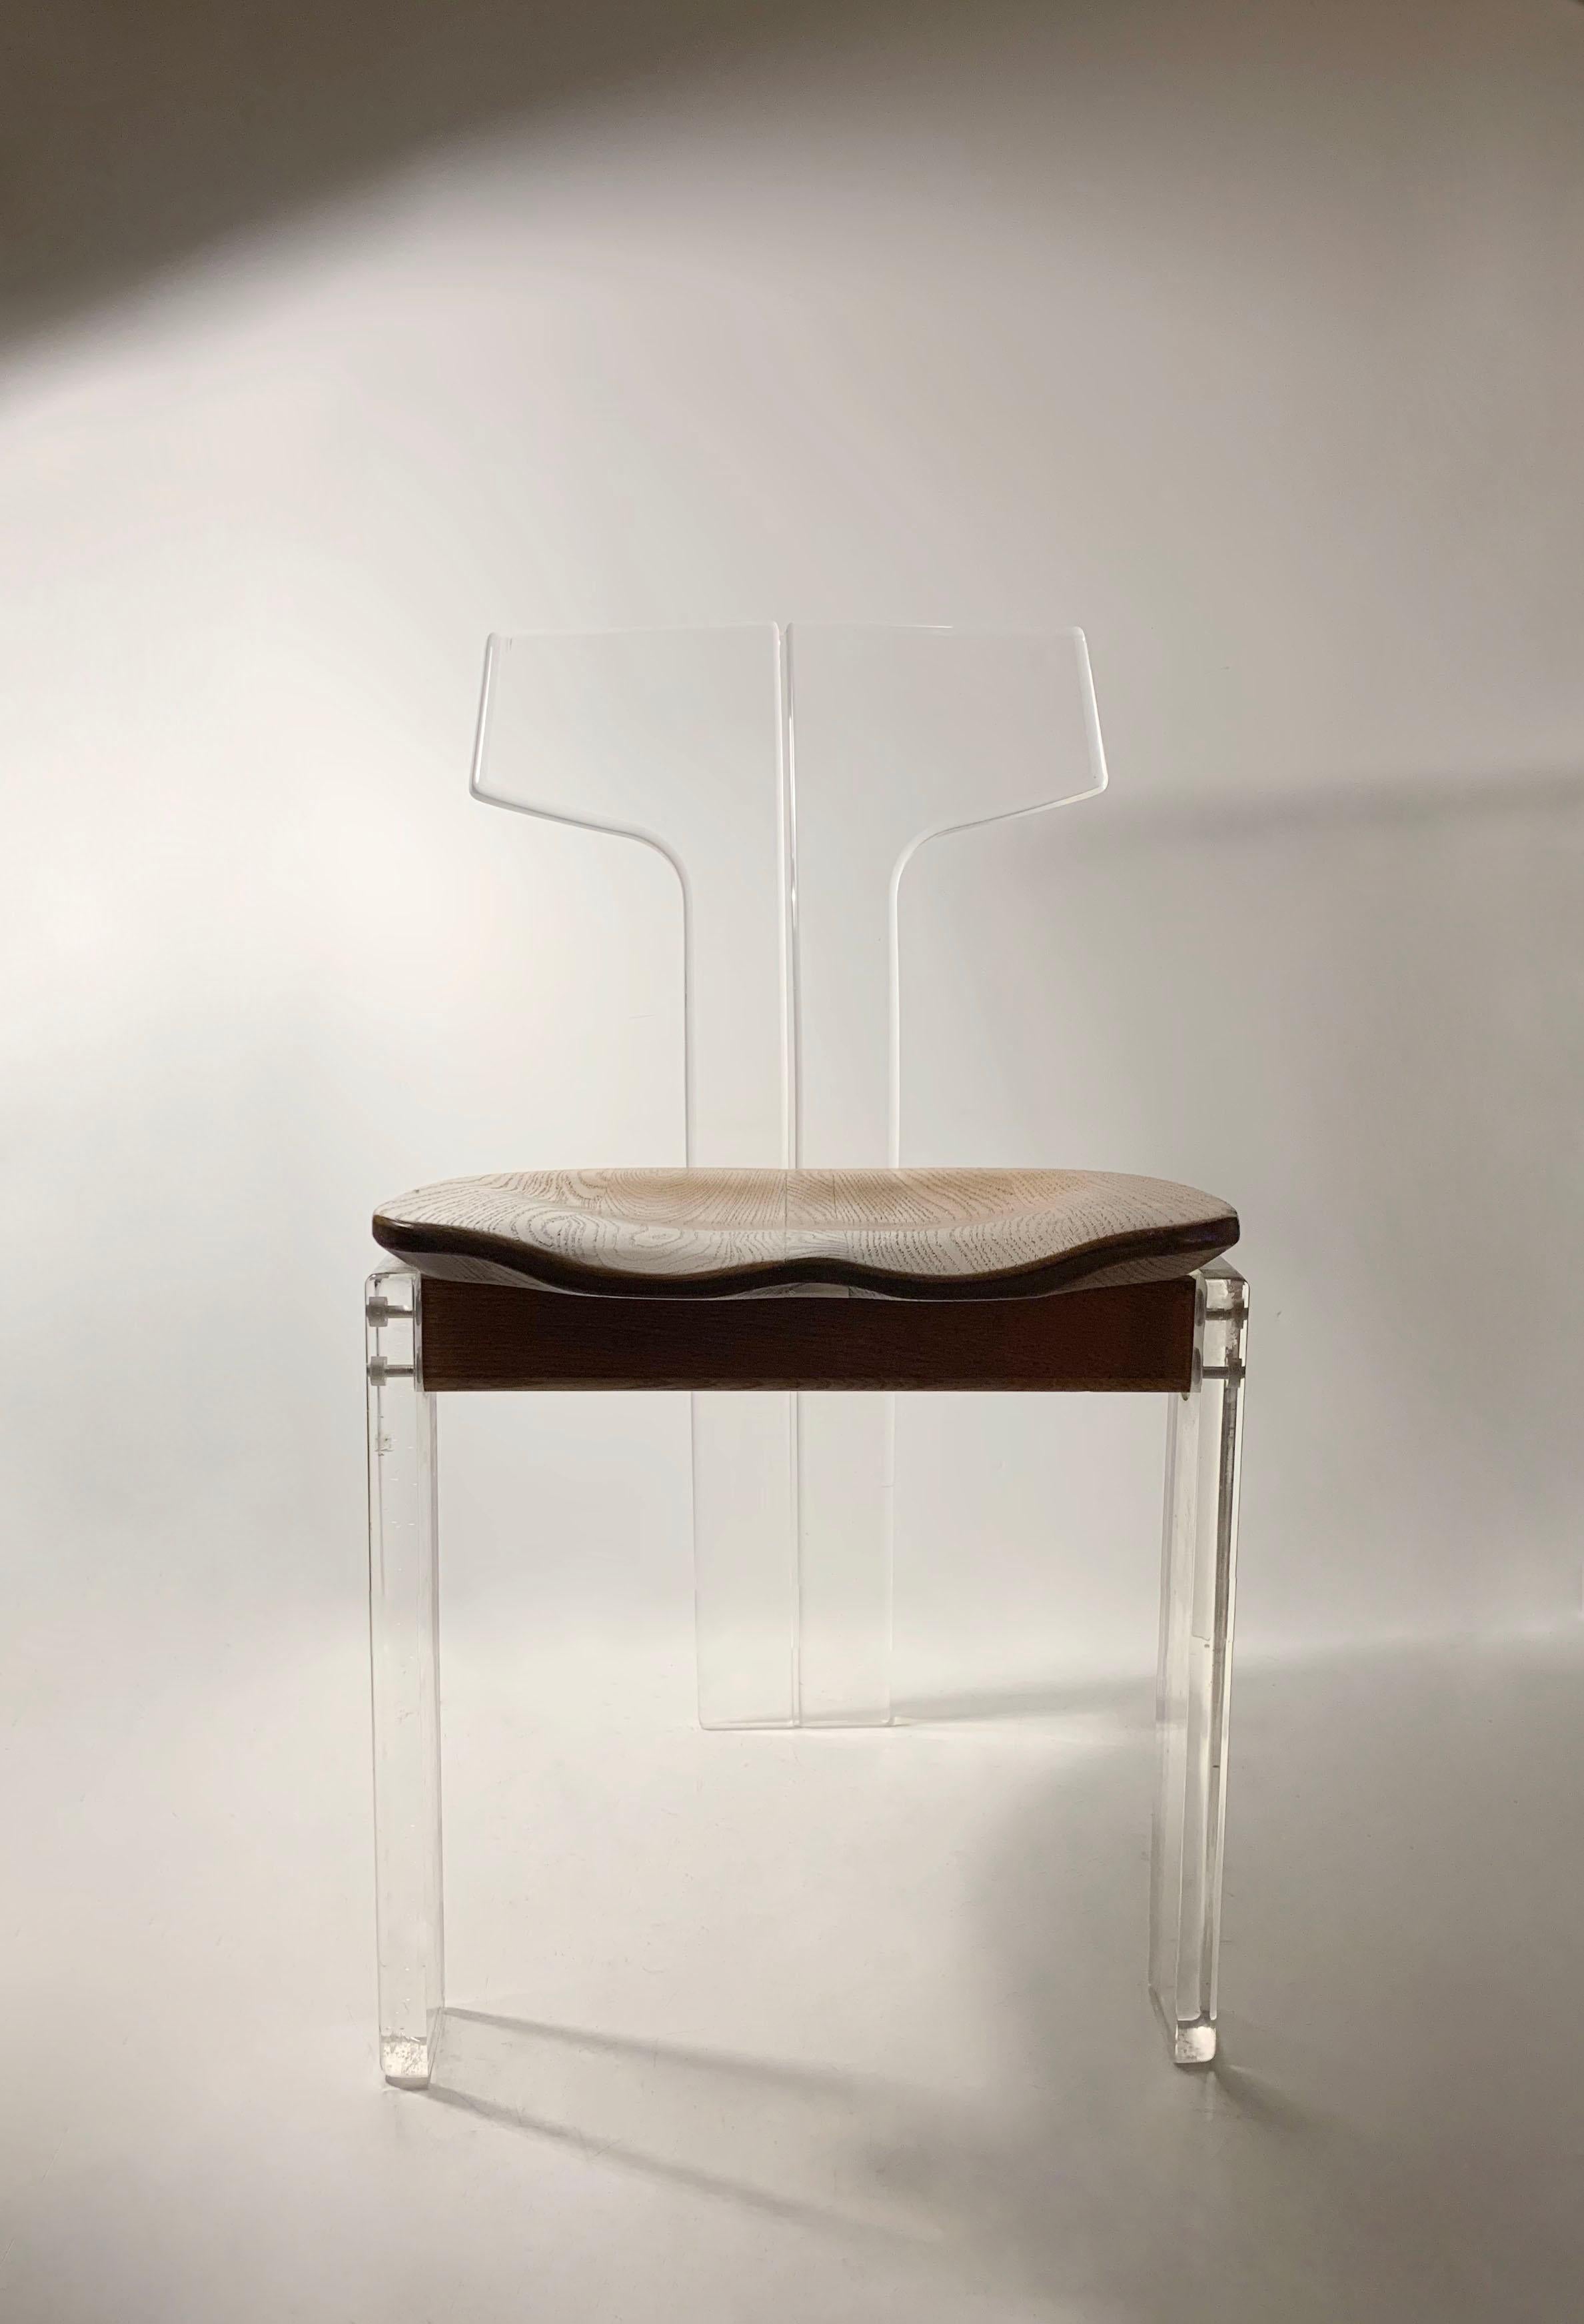 A Vintage designer lucite t-back side chair or desk chair. Very high quality well made forms. Uncertain to designer or origin. Possibly Italian. Style of Kagan